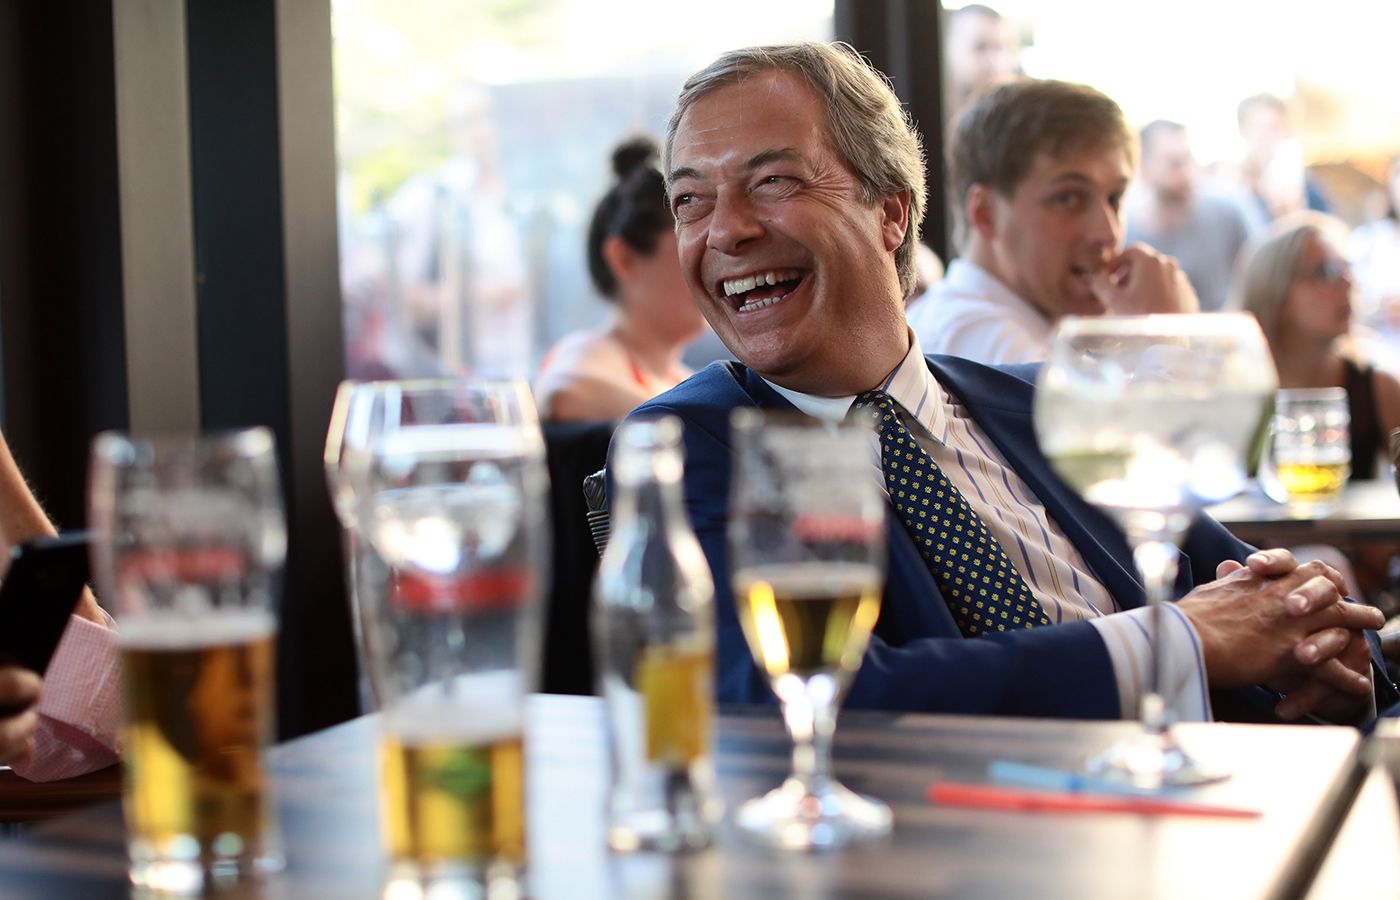 It's been hinted that Nigel Farage could return to frontline politics as Reform leader.